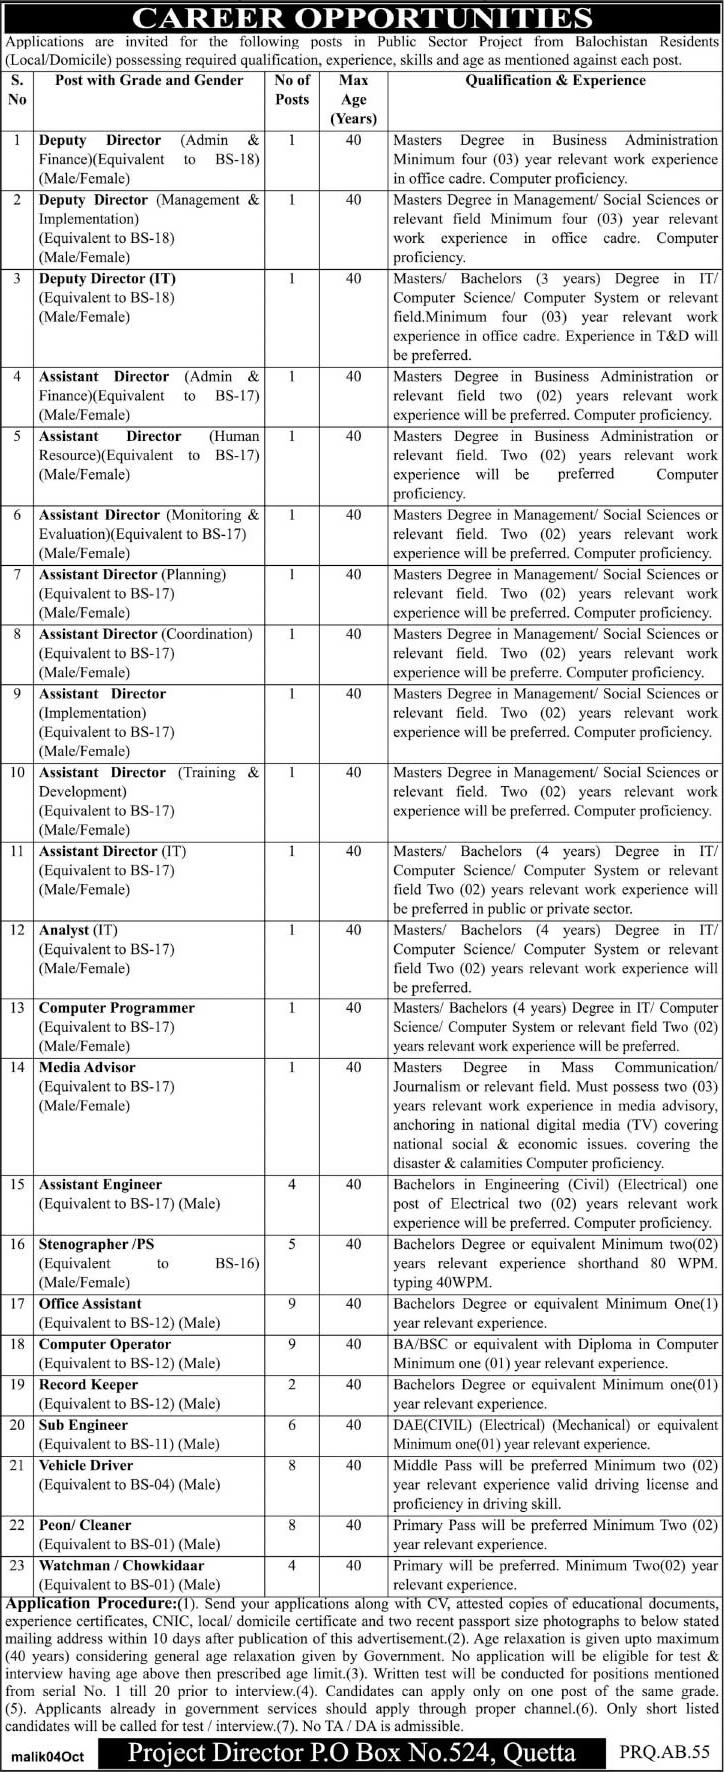 PO Box 524 Quetta Jobs 2014 October for Public Sector Projects